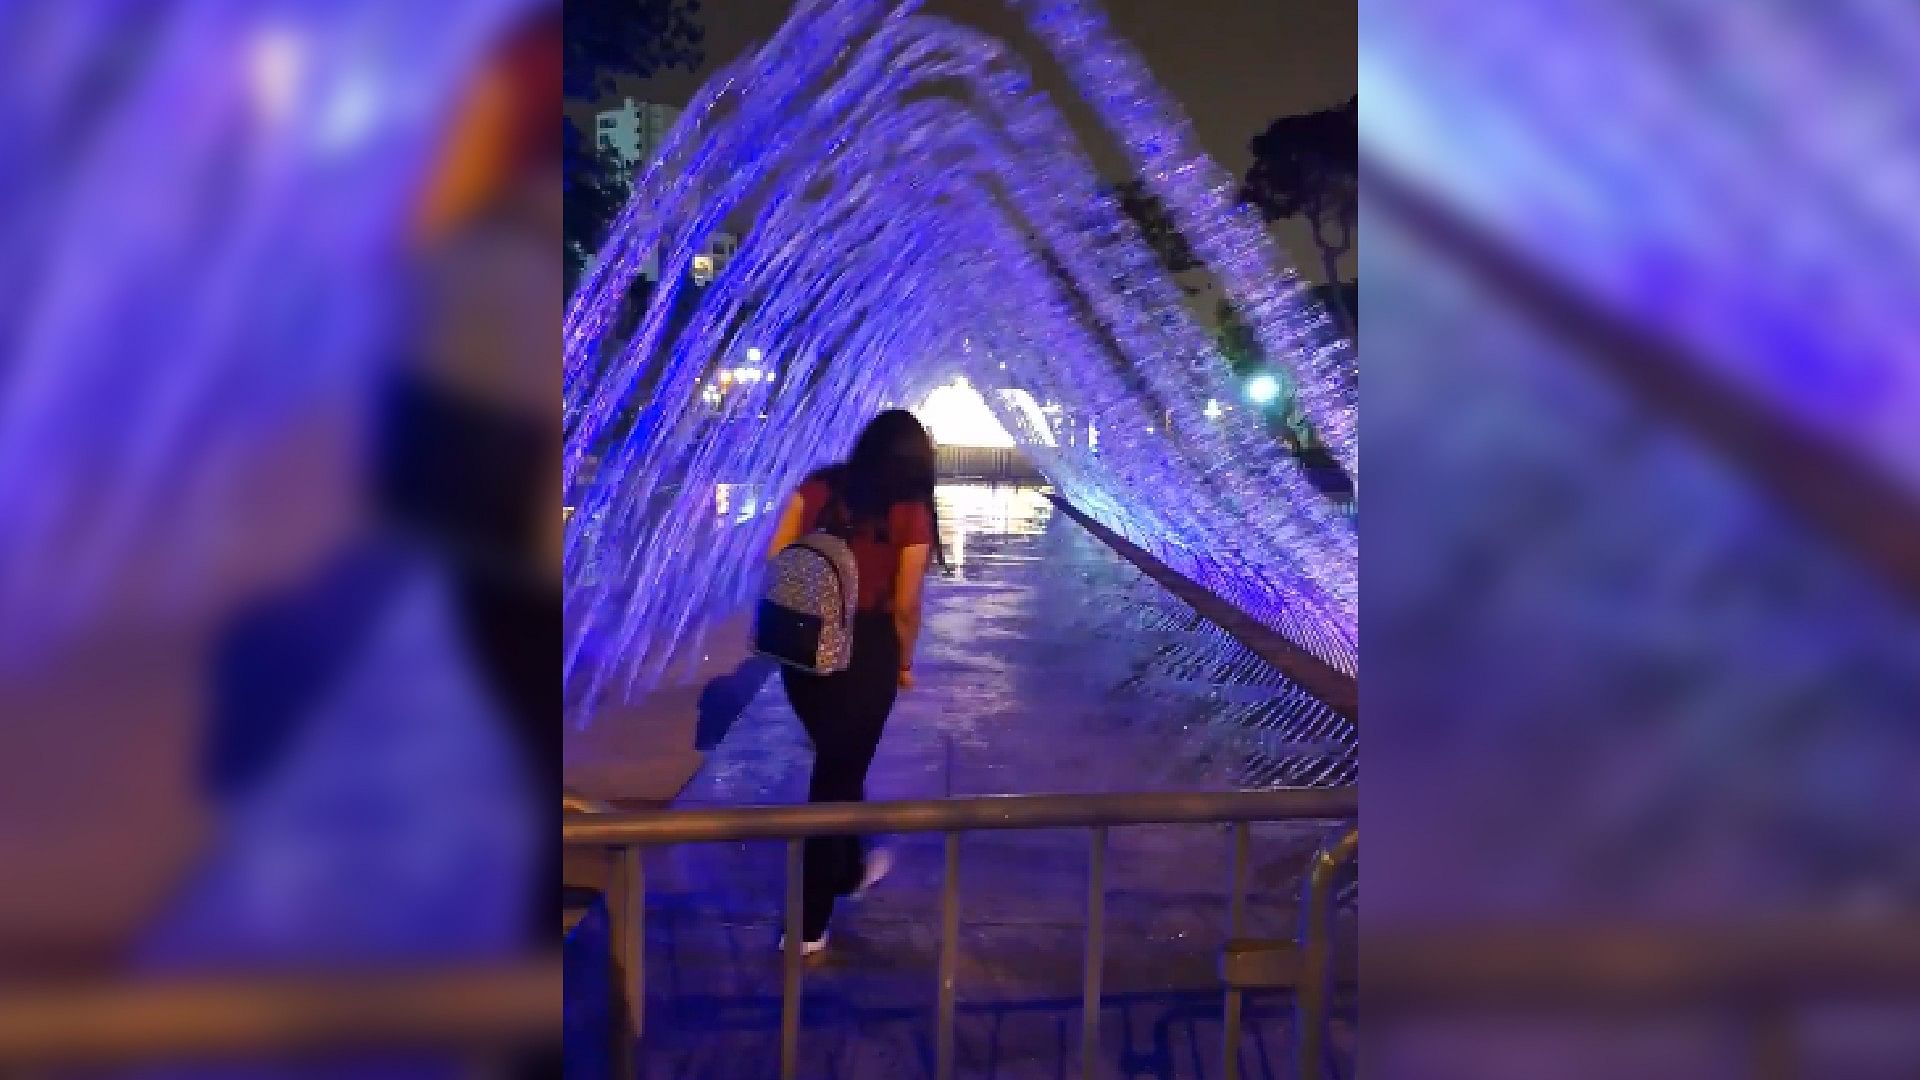 Viral Video: woman goes in fountain but gets wet video goes viral